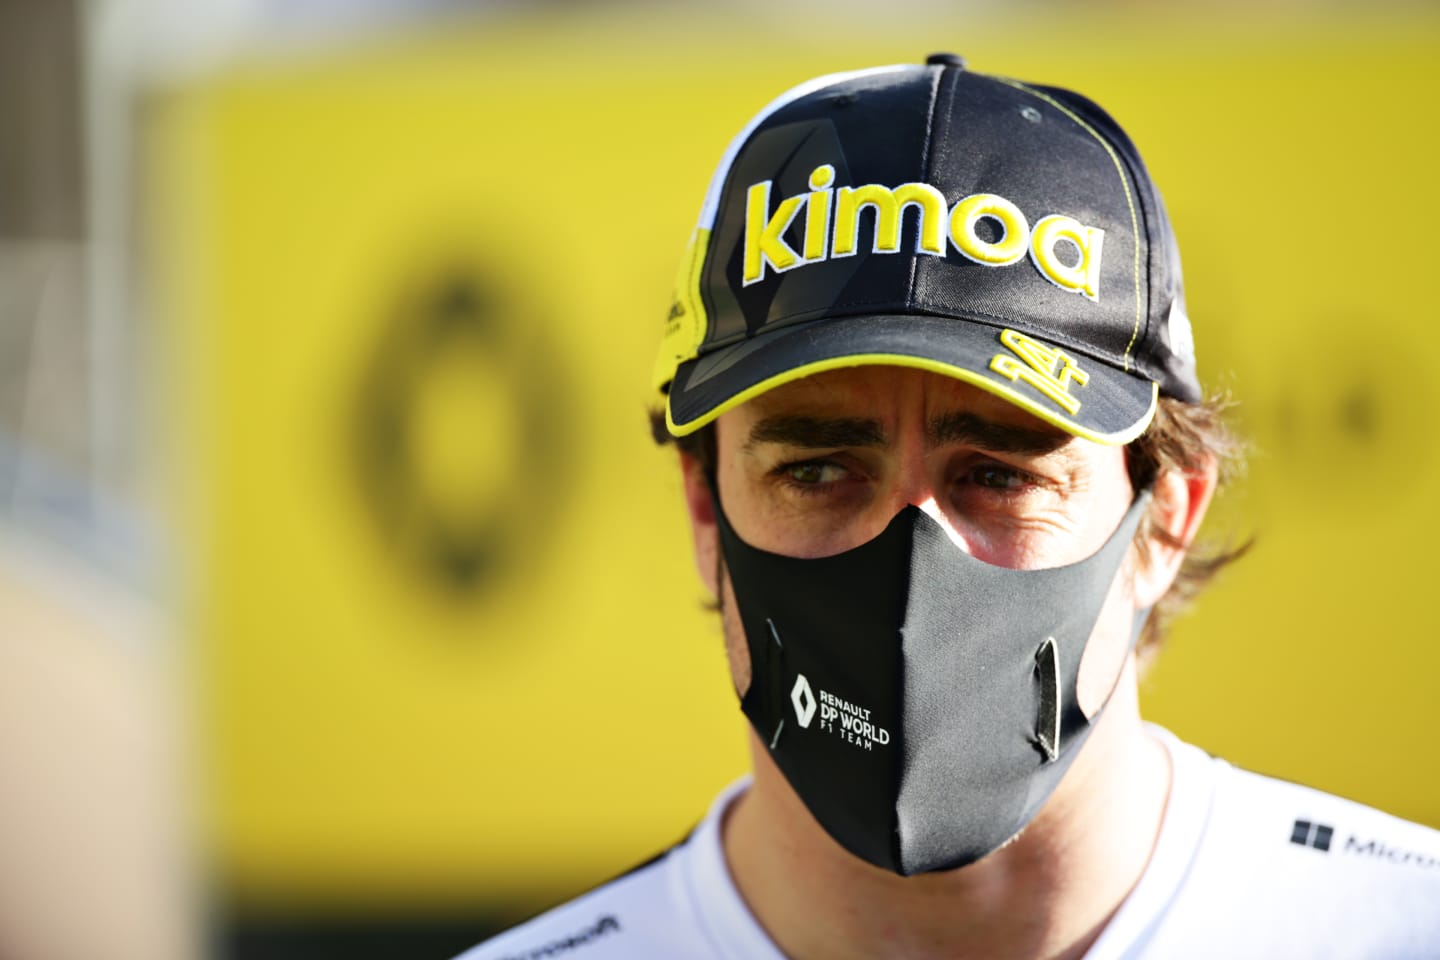 BAHRAIN, BAHRAIN - DECEMBER 04: Fernando Alonso of Spain and Renault Sport F1 talks to the media in